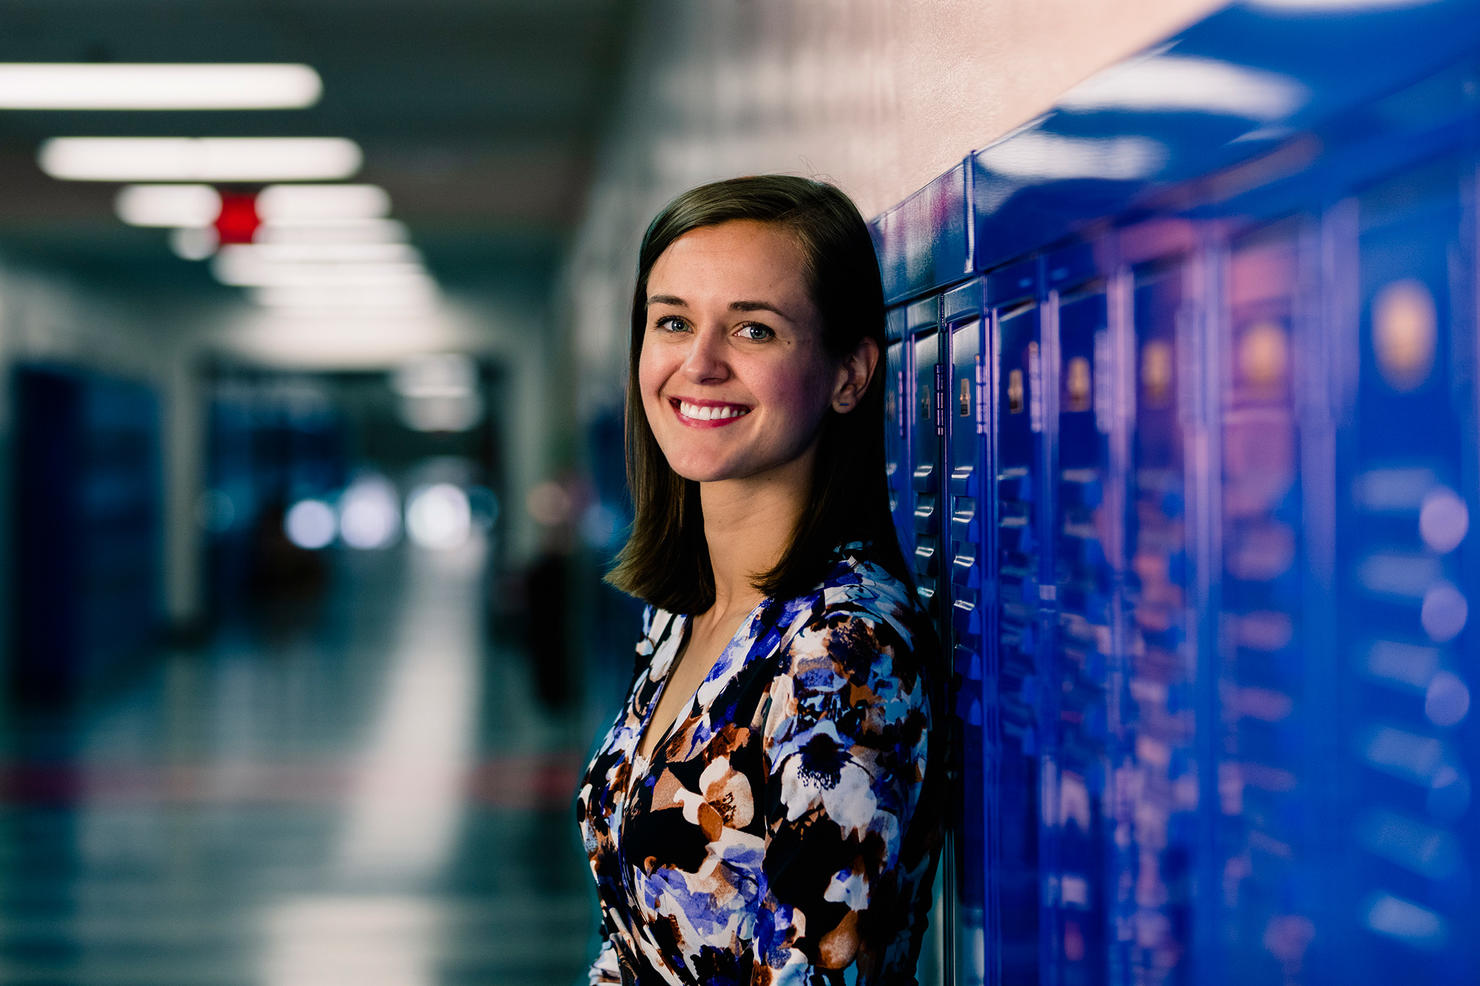 Headshot of Sarah Parshall. She is standing by the lockers in a school hallway.